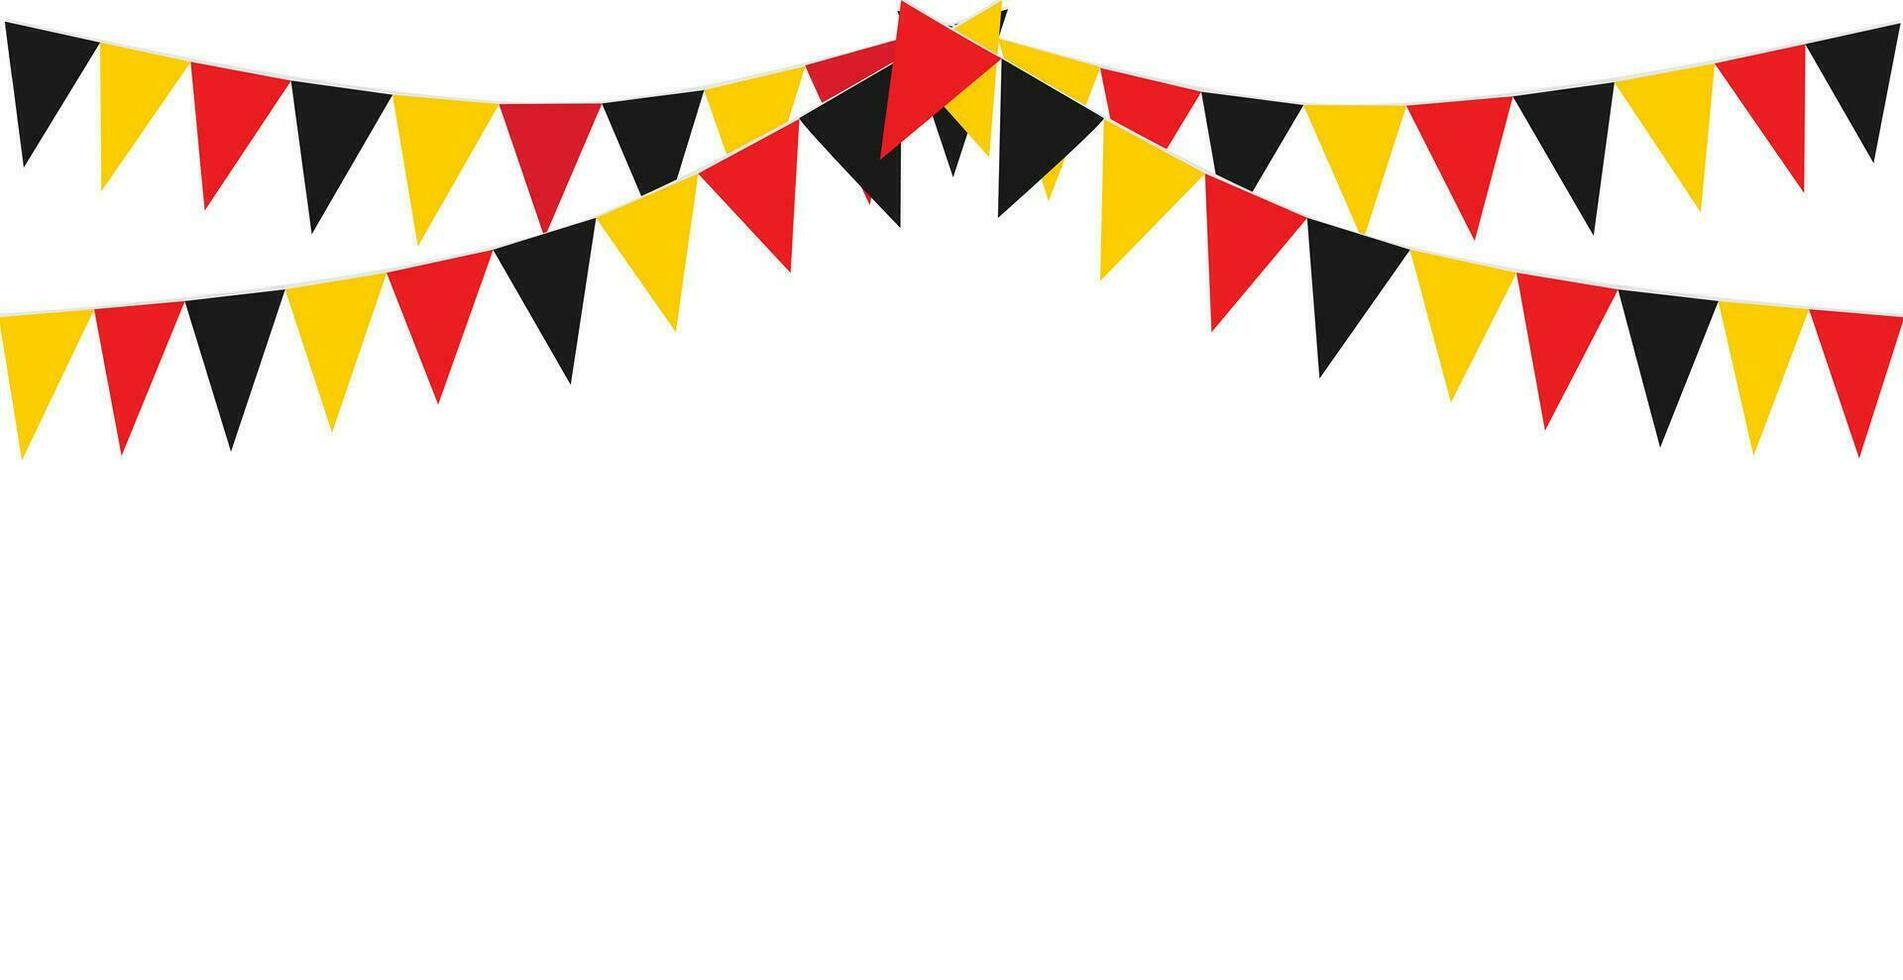 Bunting Hanging Red Black and Yellow Flag Triangles Banner Background. Bunting flags for celebration, party, fair, market, sale, nations. German, Deutschland concepts. vector